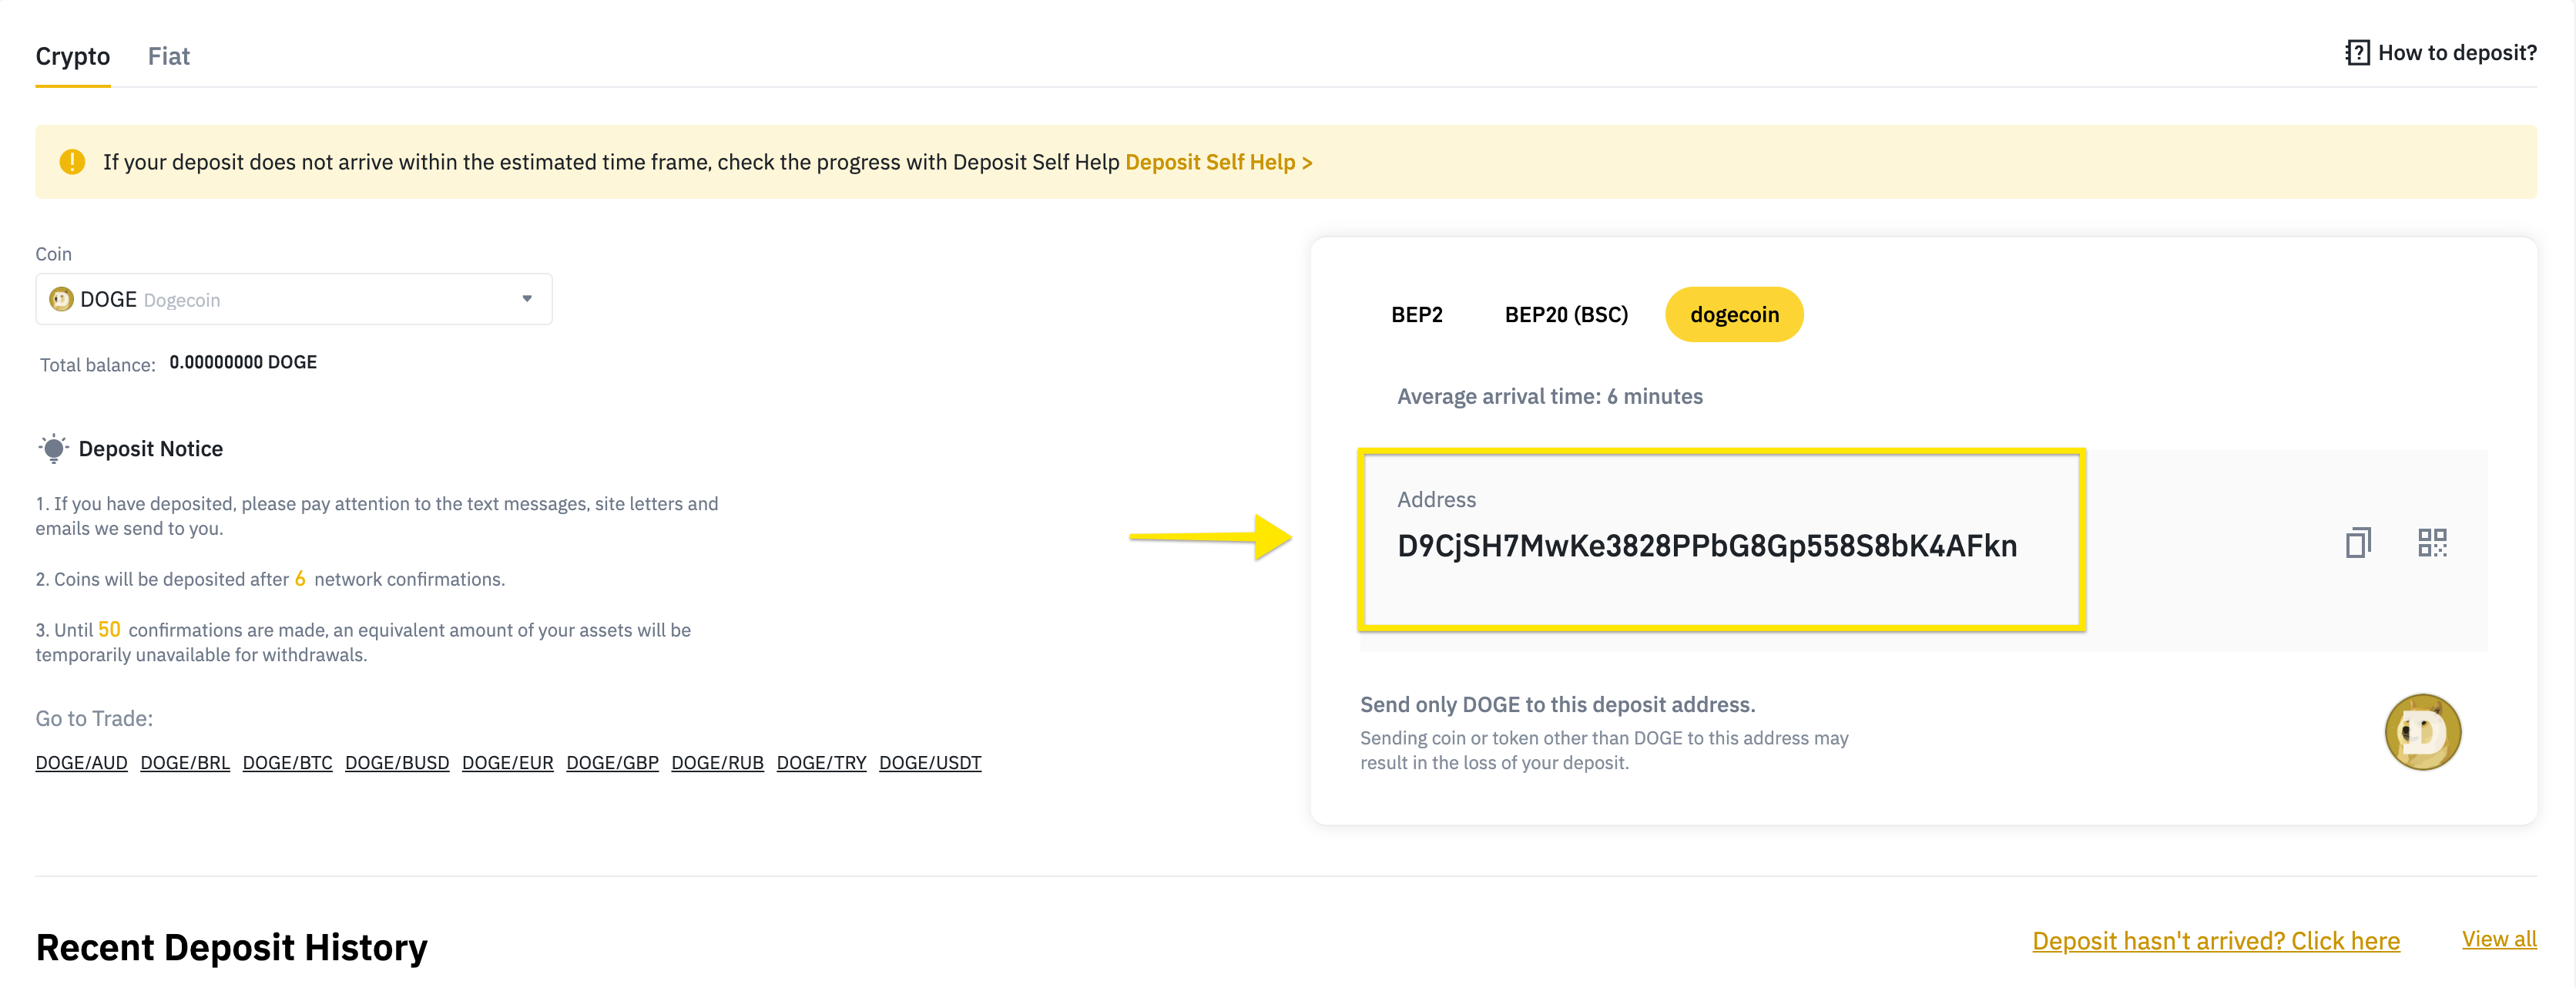 How to Deposit & Sell Dogecoin on WazirX and Withdraw INR